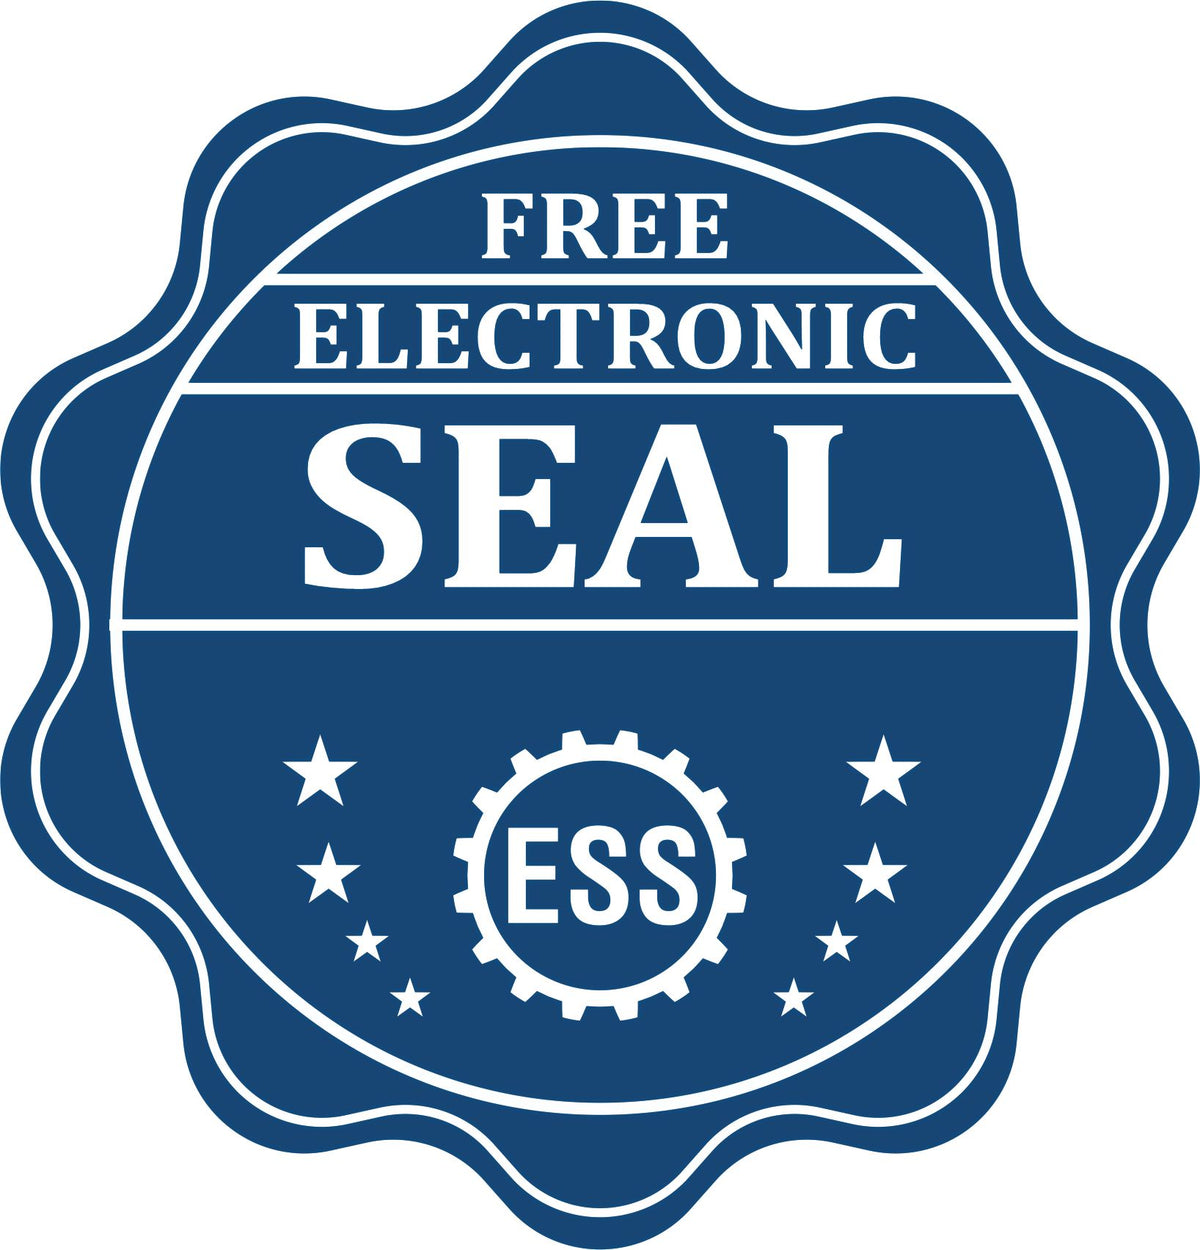 A badge showing a free electronic seal for the Hybrid New Mexico Architect Seal with stars and the ESS gear on the emblem.